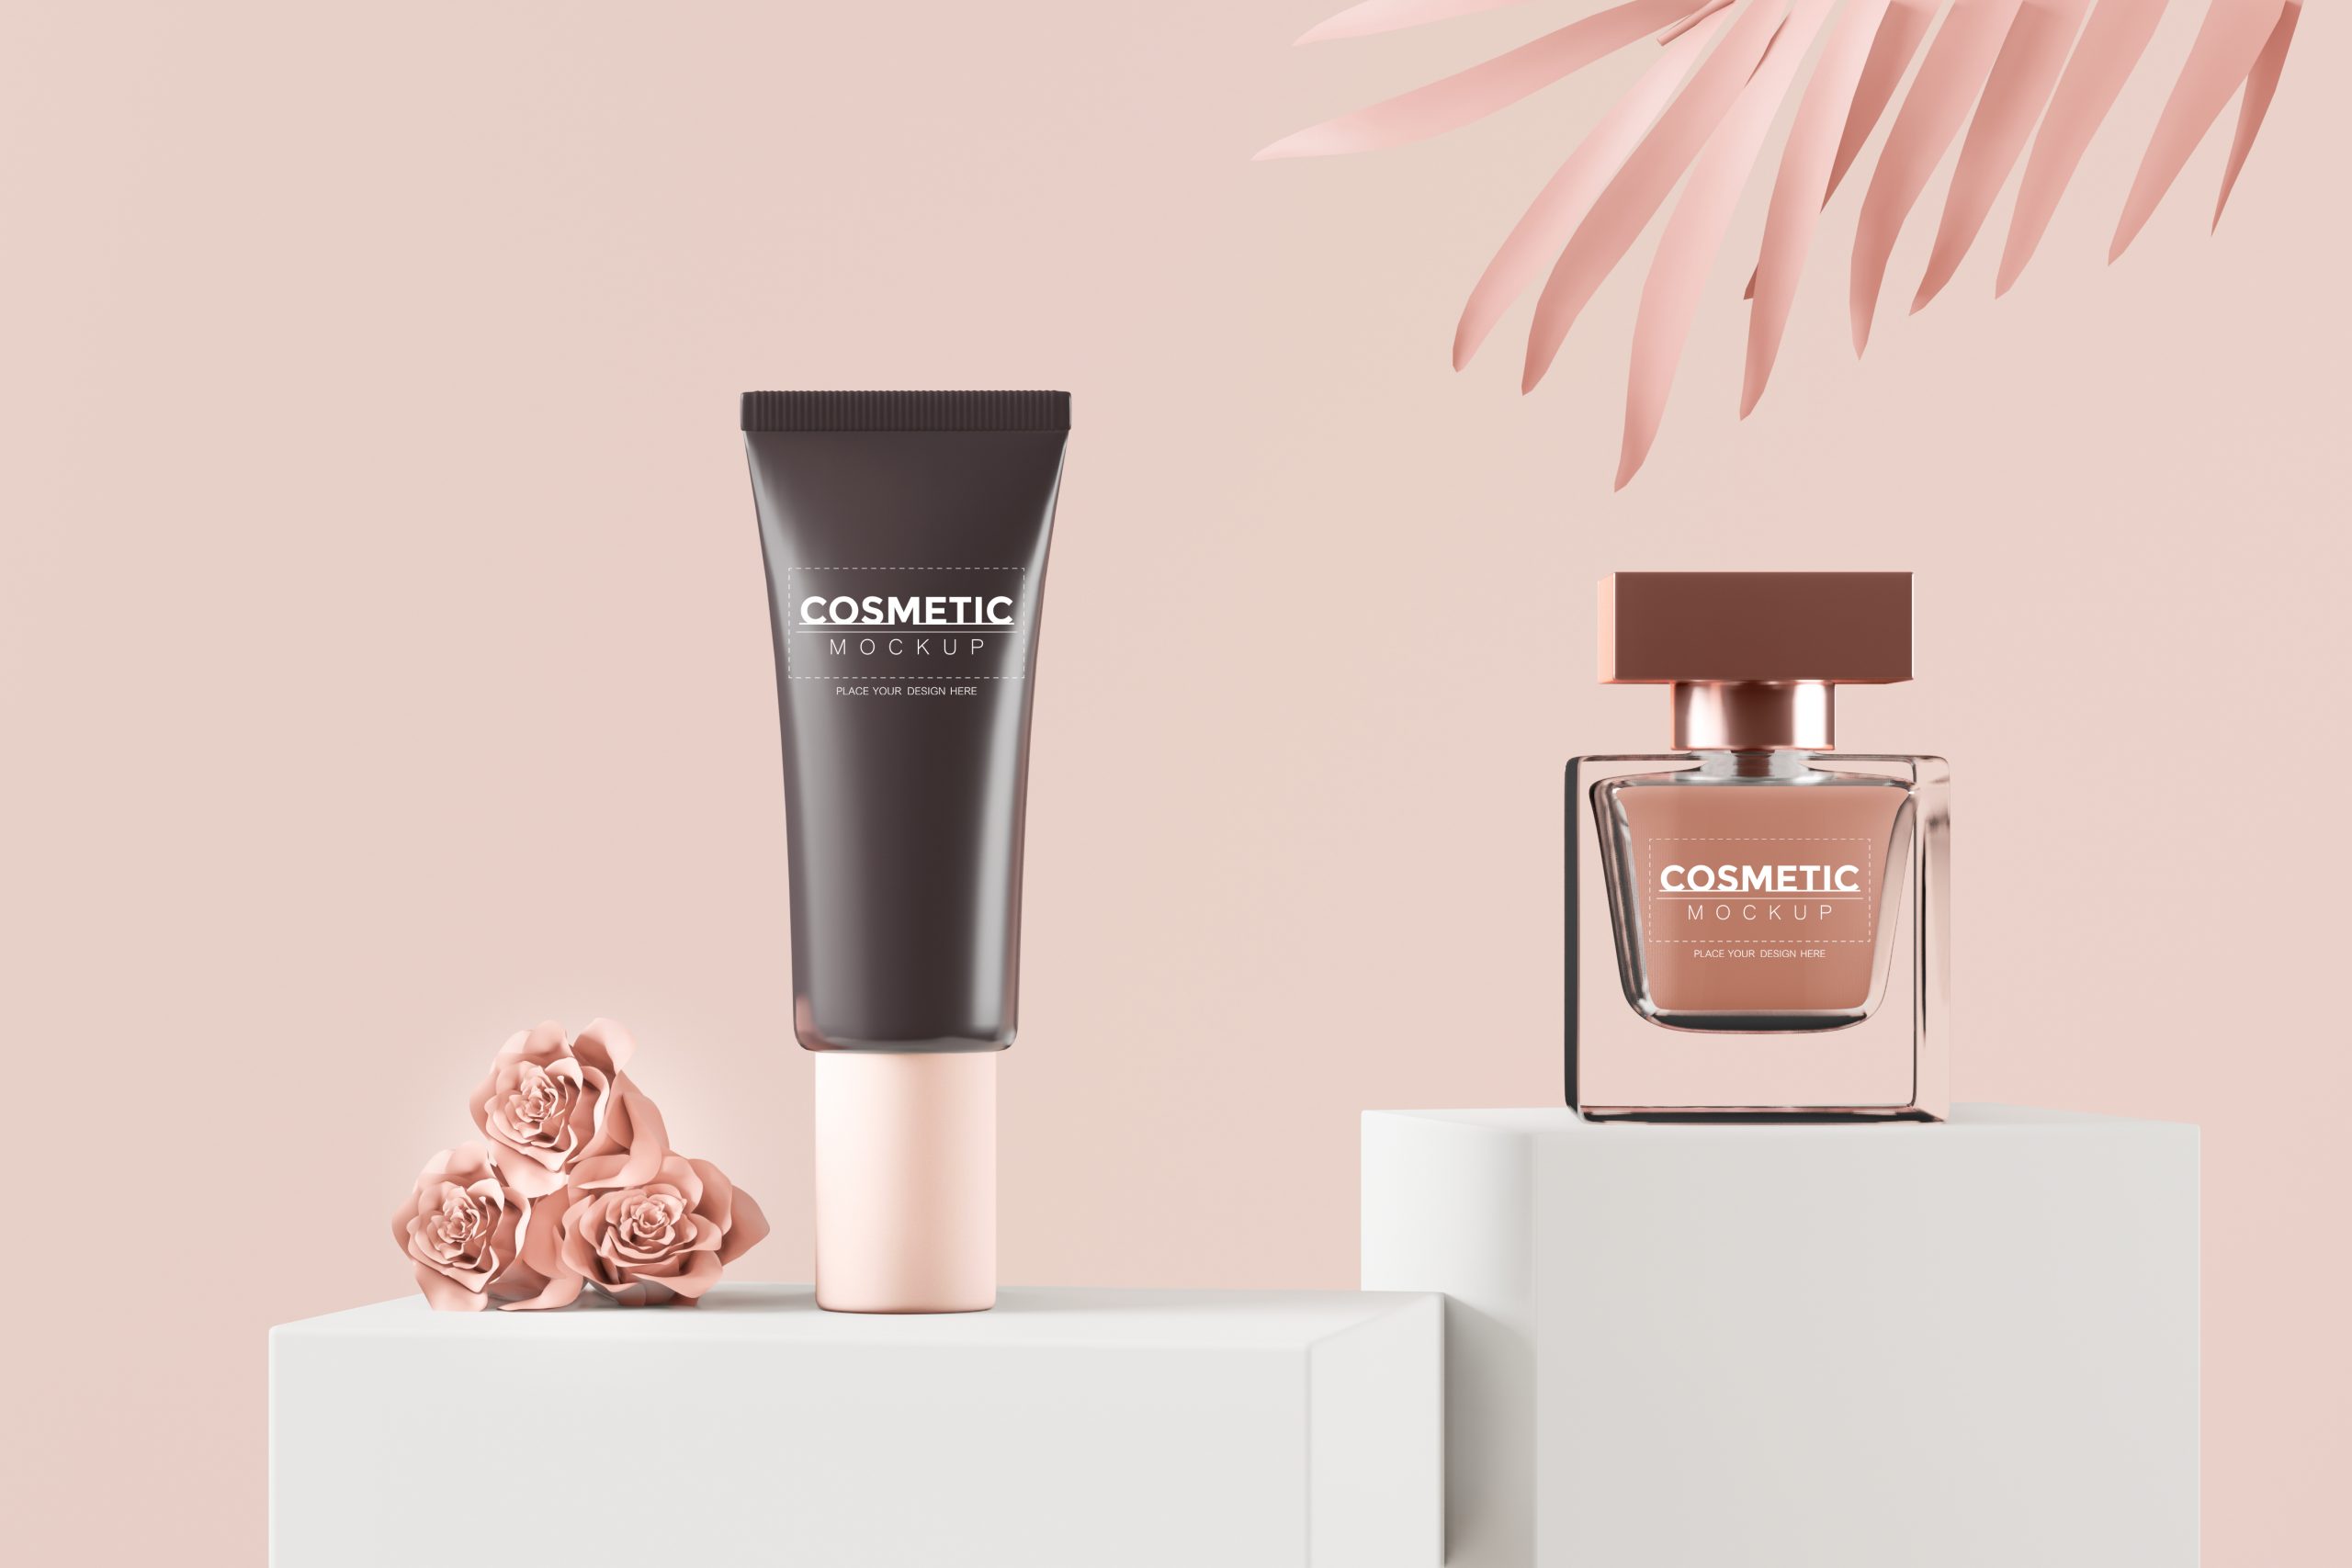 Cosmetic product Packaging PSD Mockup